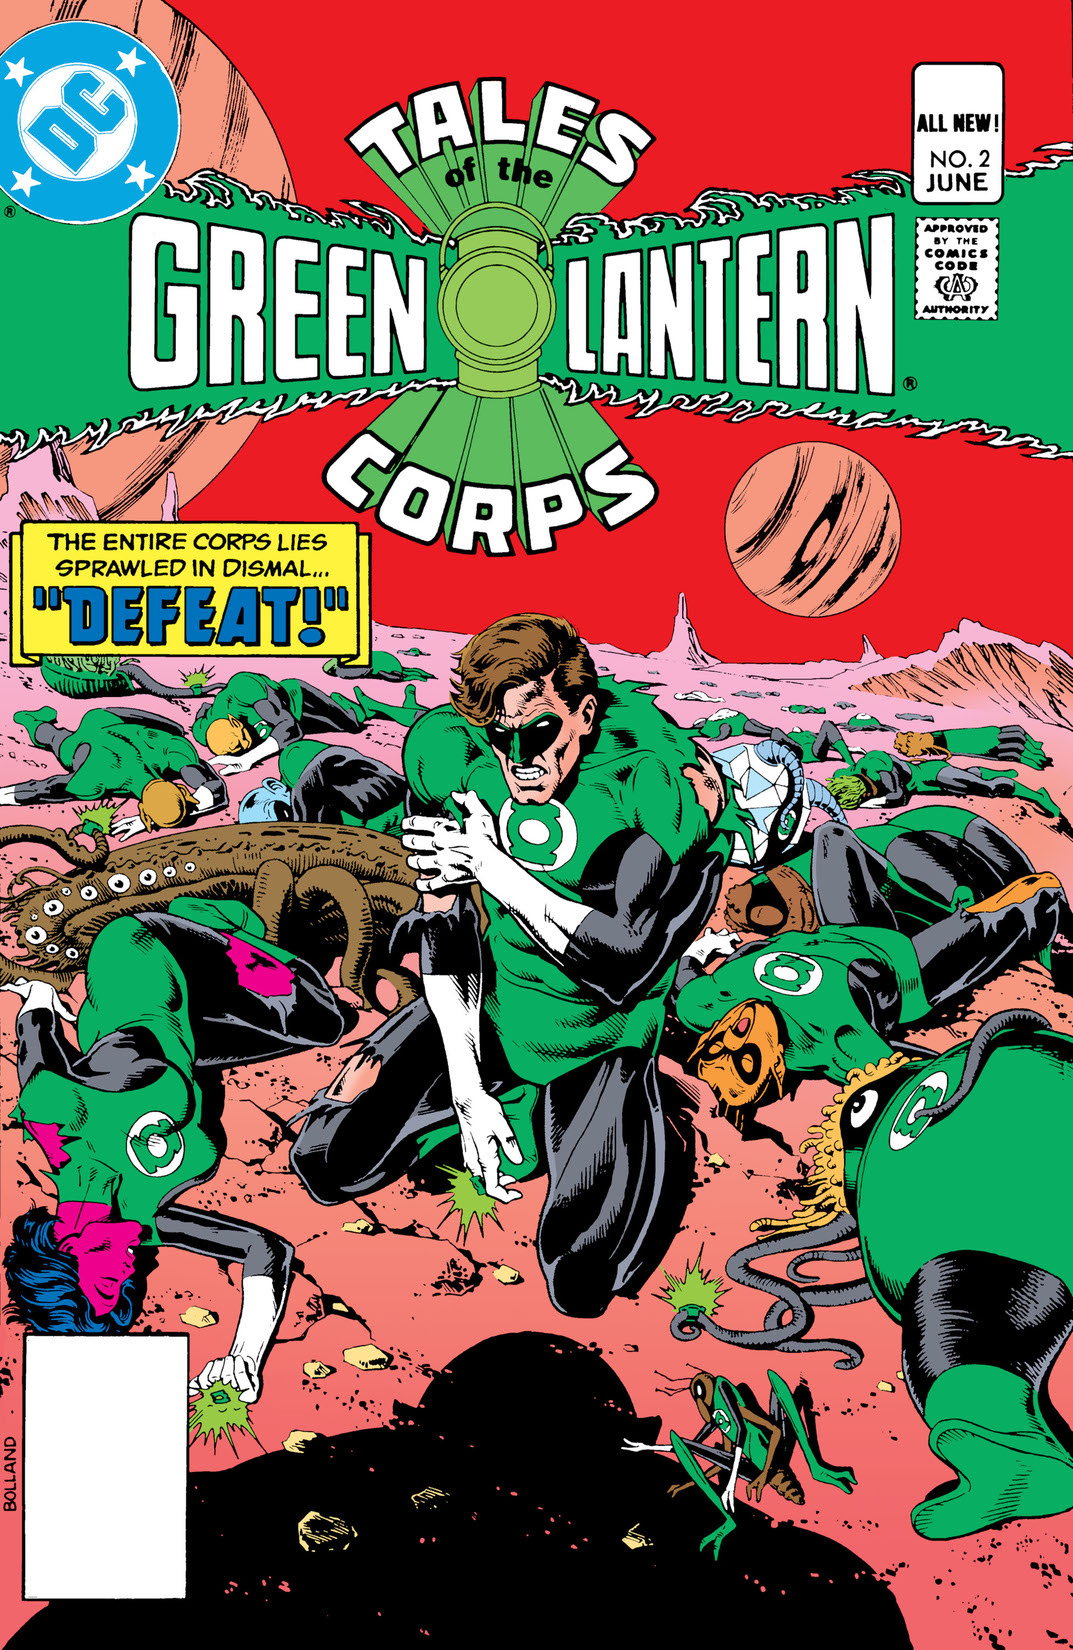 Tales of the Green Lantern Corps #2 preview images